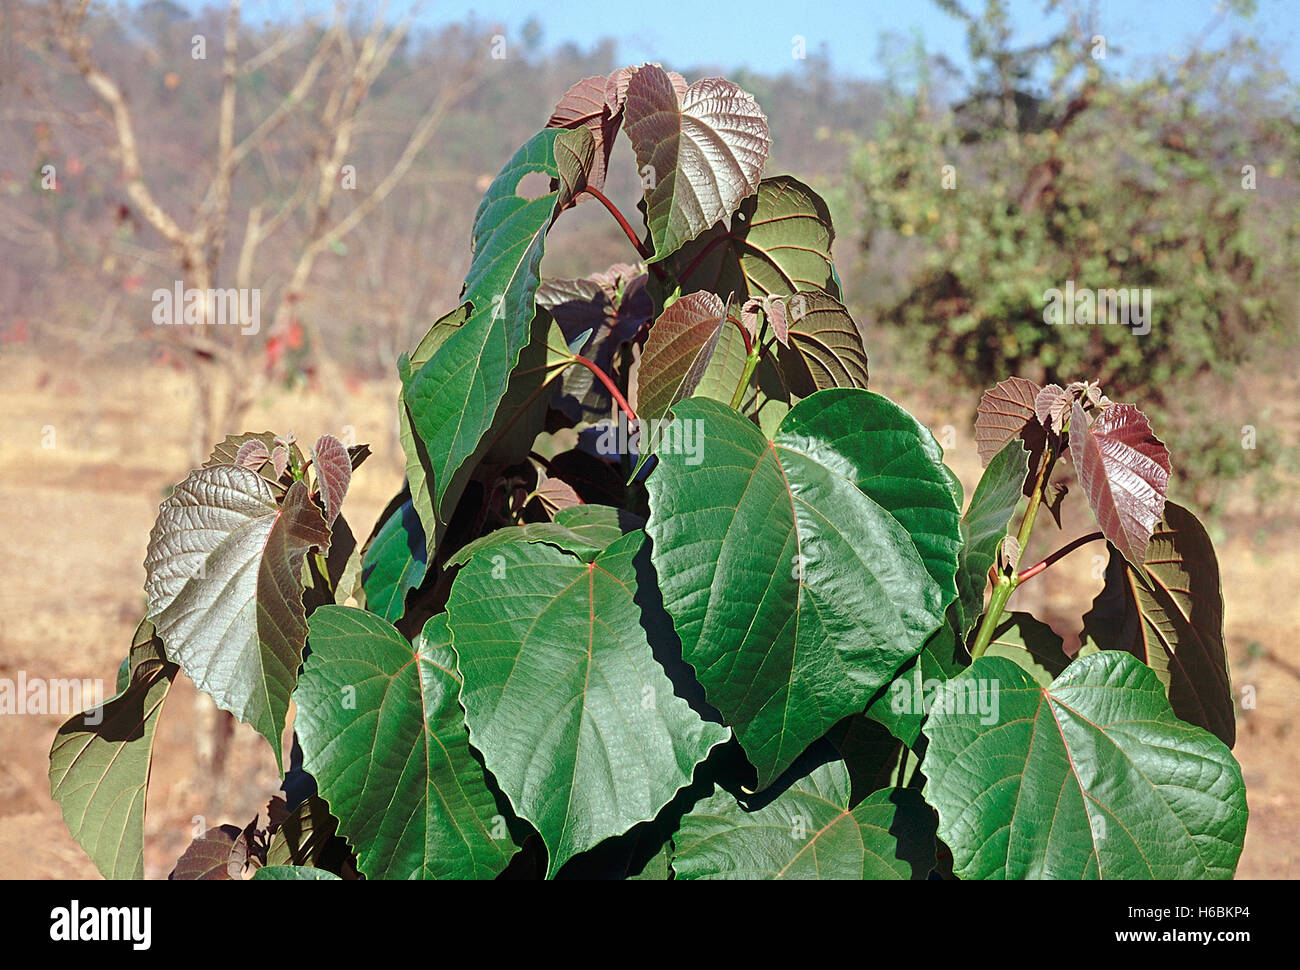 Leaves. Trewia nudiflora. Family: Euphorbiaceae. A medium-sized deciduous tree mainly found in moist areas. Stock Photo